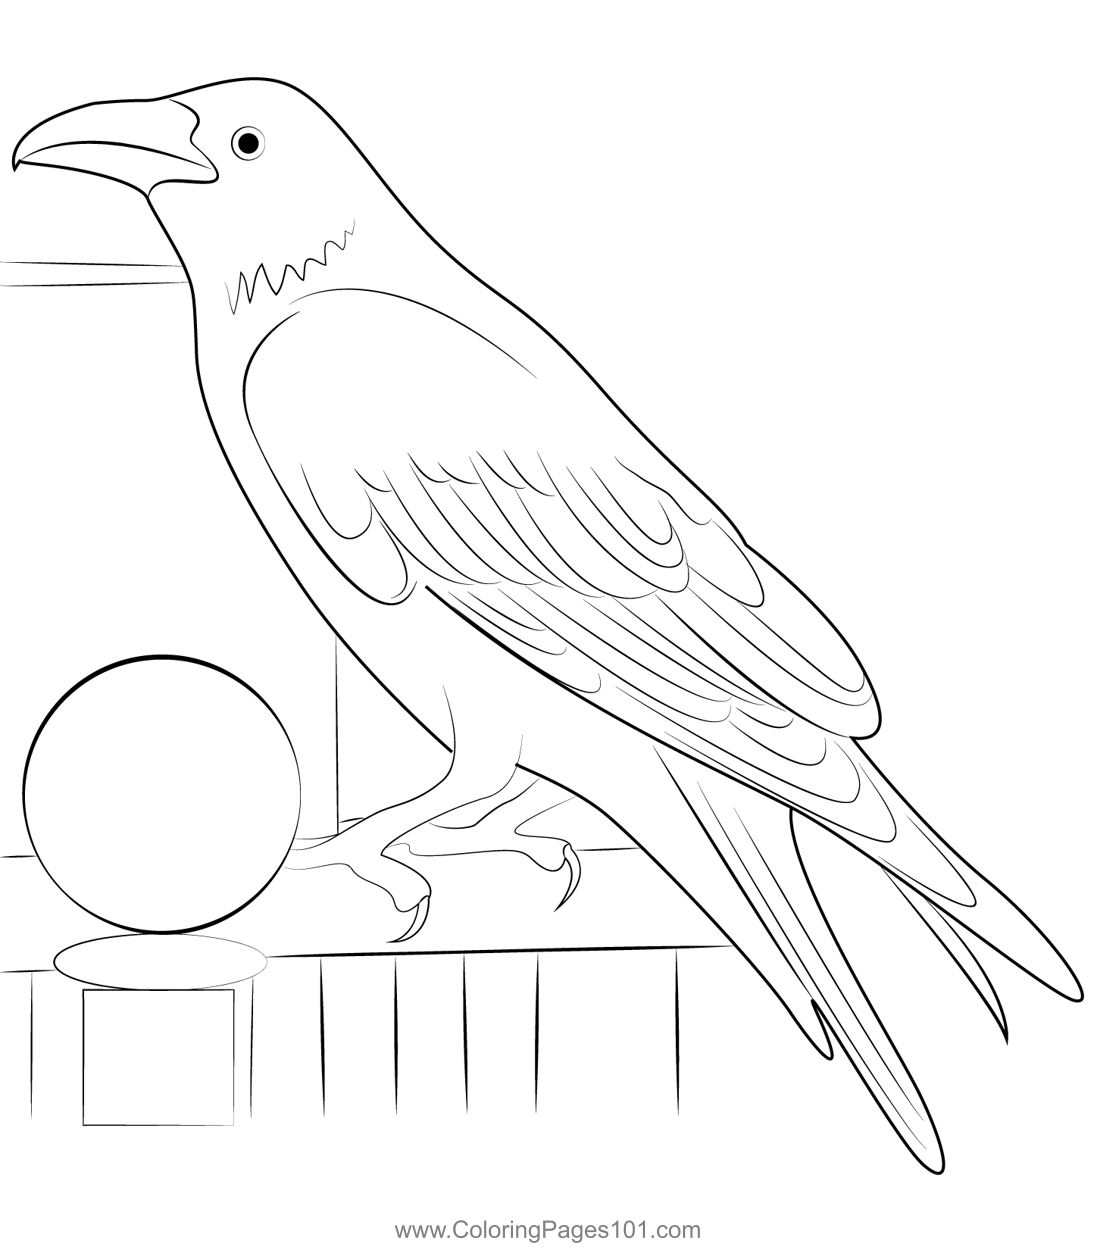 Australian raven coloring page for kids